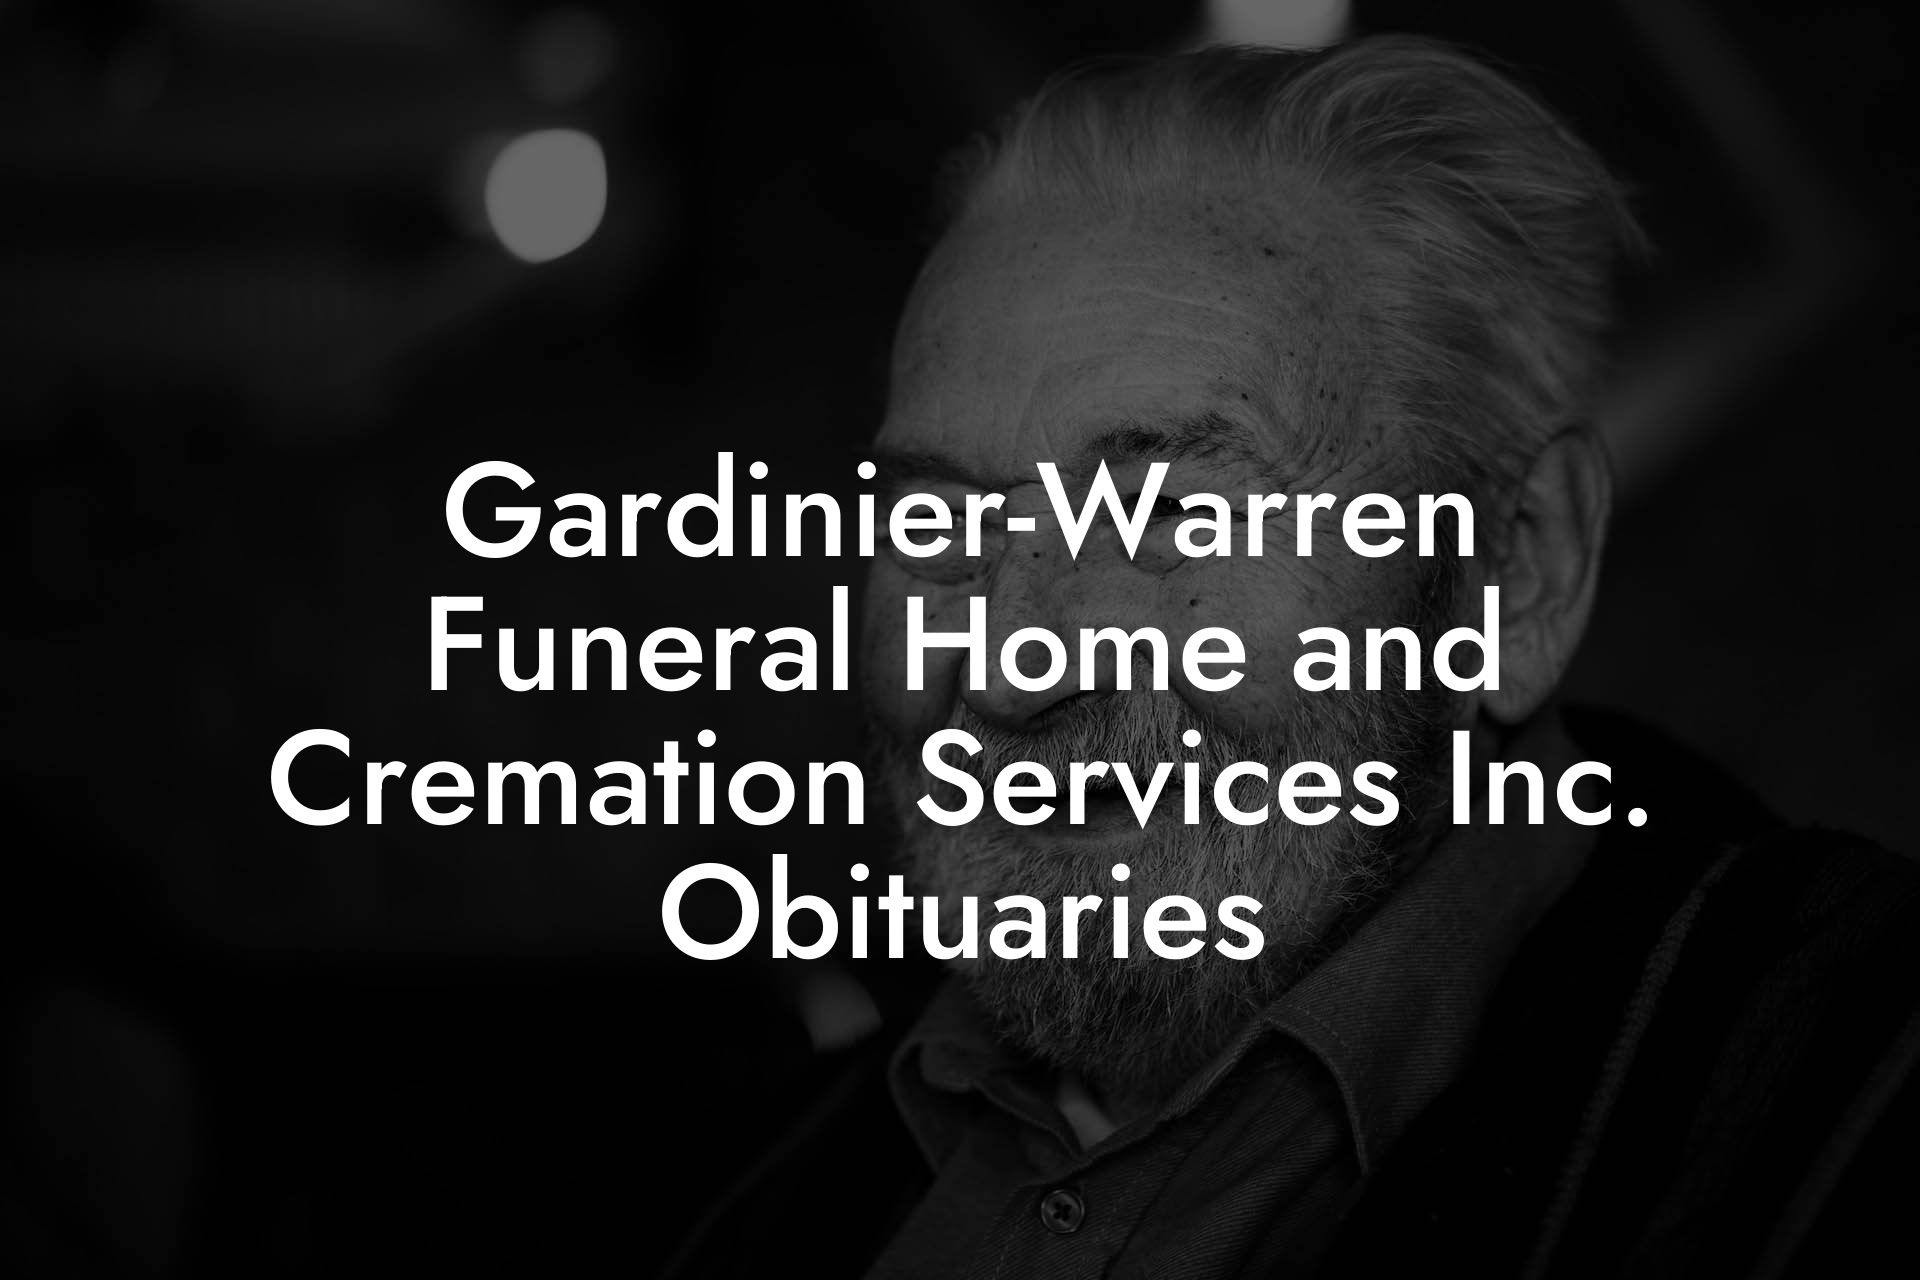 Gardinier-Warren Funeral Home and Cremation Services Inc. Obituaries